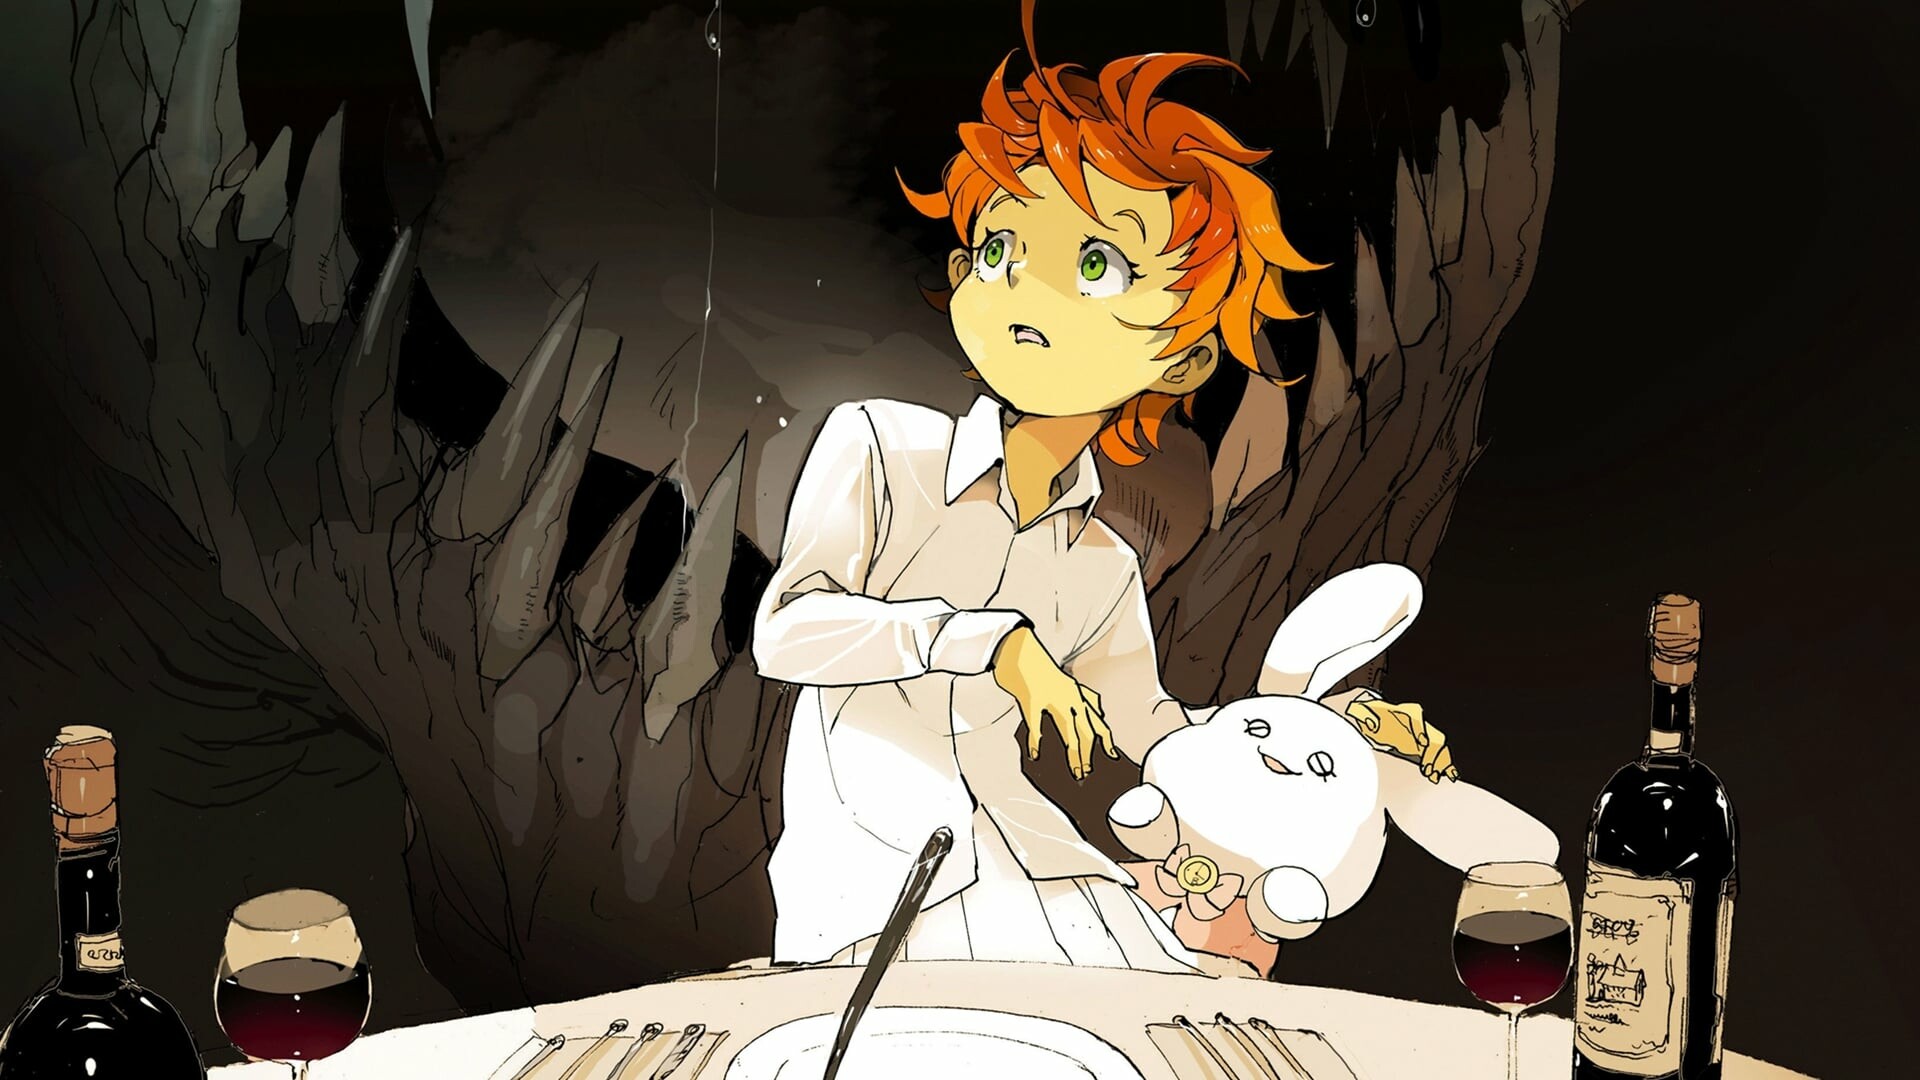 The Promised Neverland: The series won the "Shonen Tournament 2018" by the editorial staff of the French website Manga-News. 1920x1080 Full HD Wallpaper.